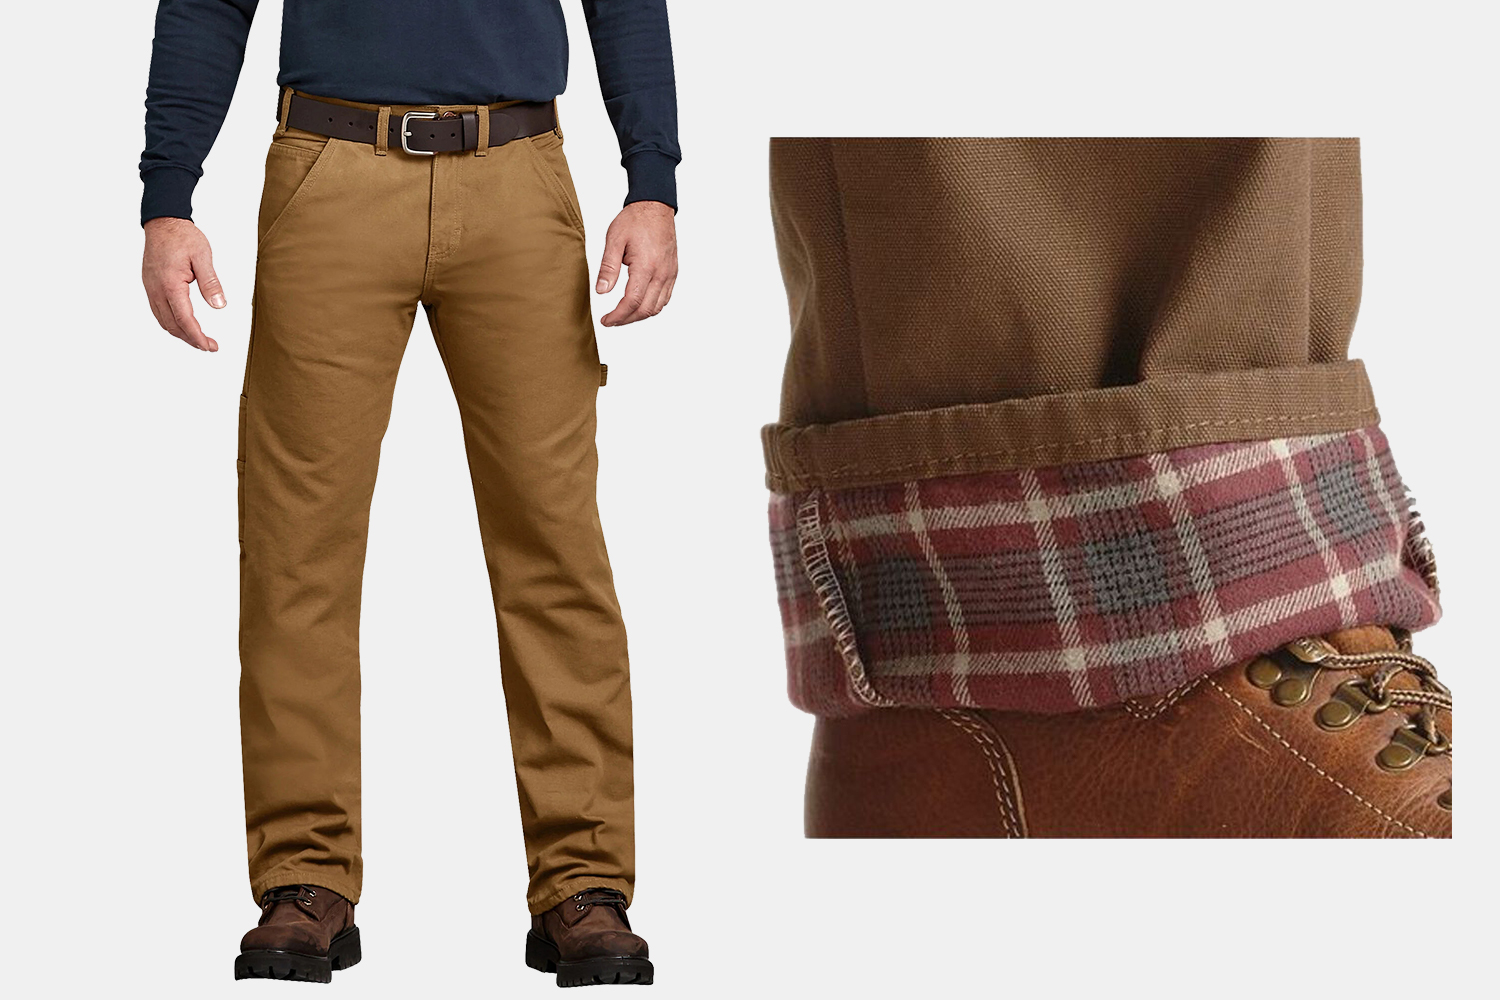 The Best FleeceLined Pants for the Outdoors